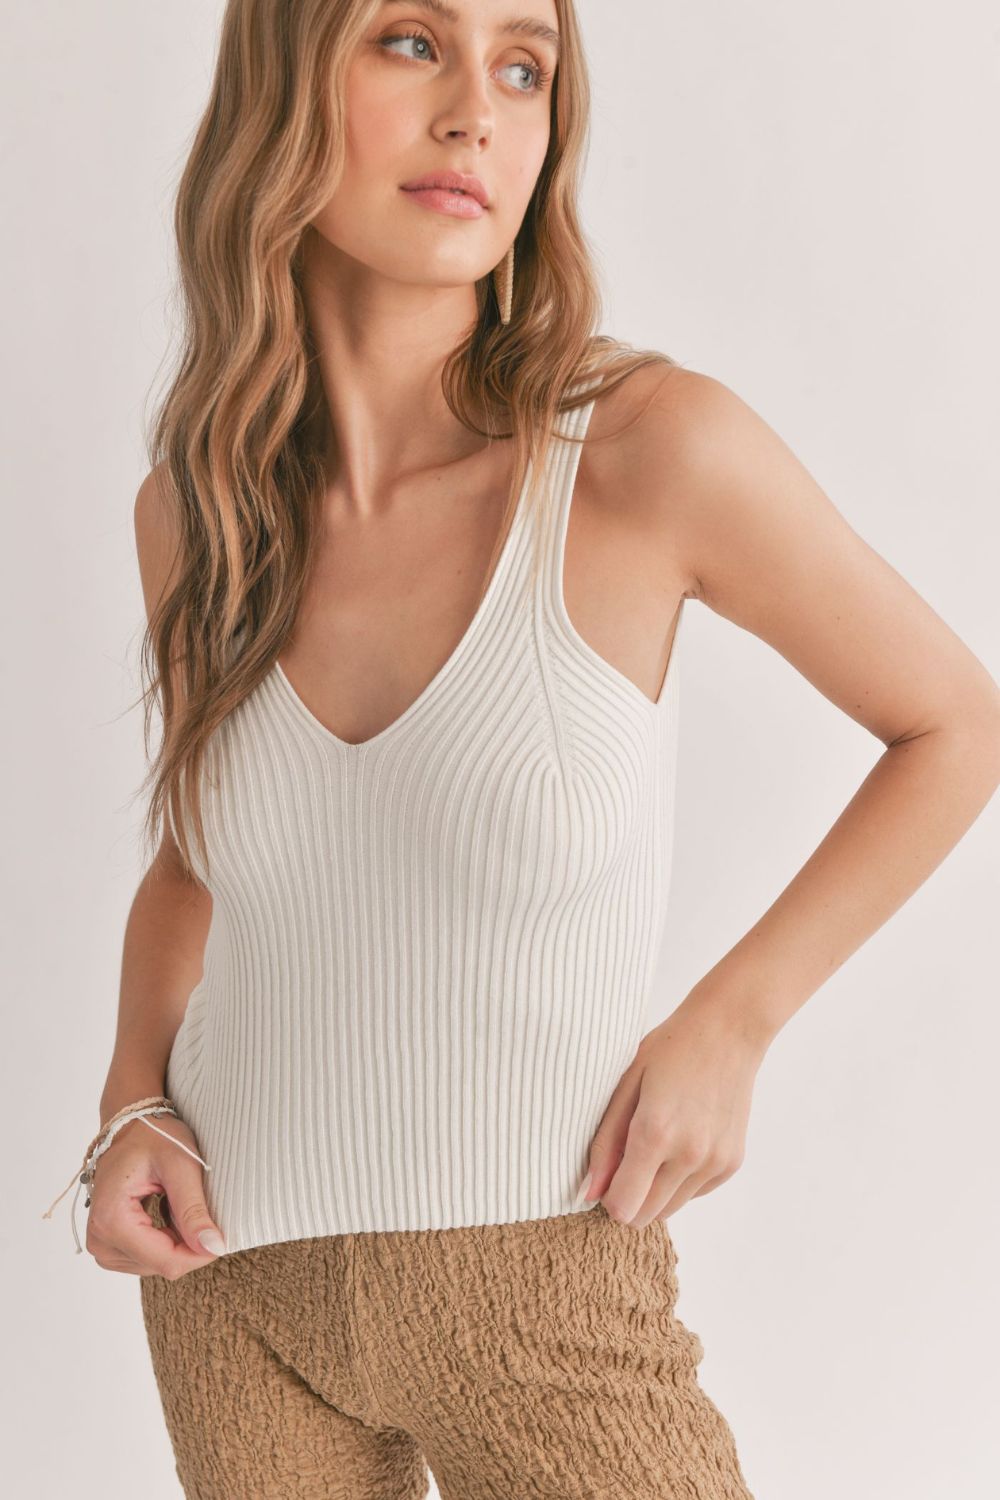 Women's V-Neck Sweater Tank | Ivory - Women's Shirts & Tops - Blooming Daily